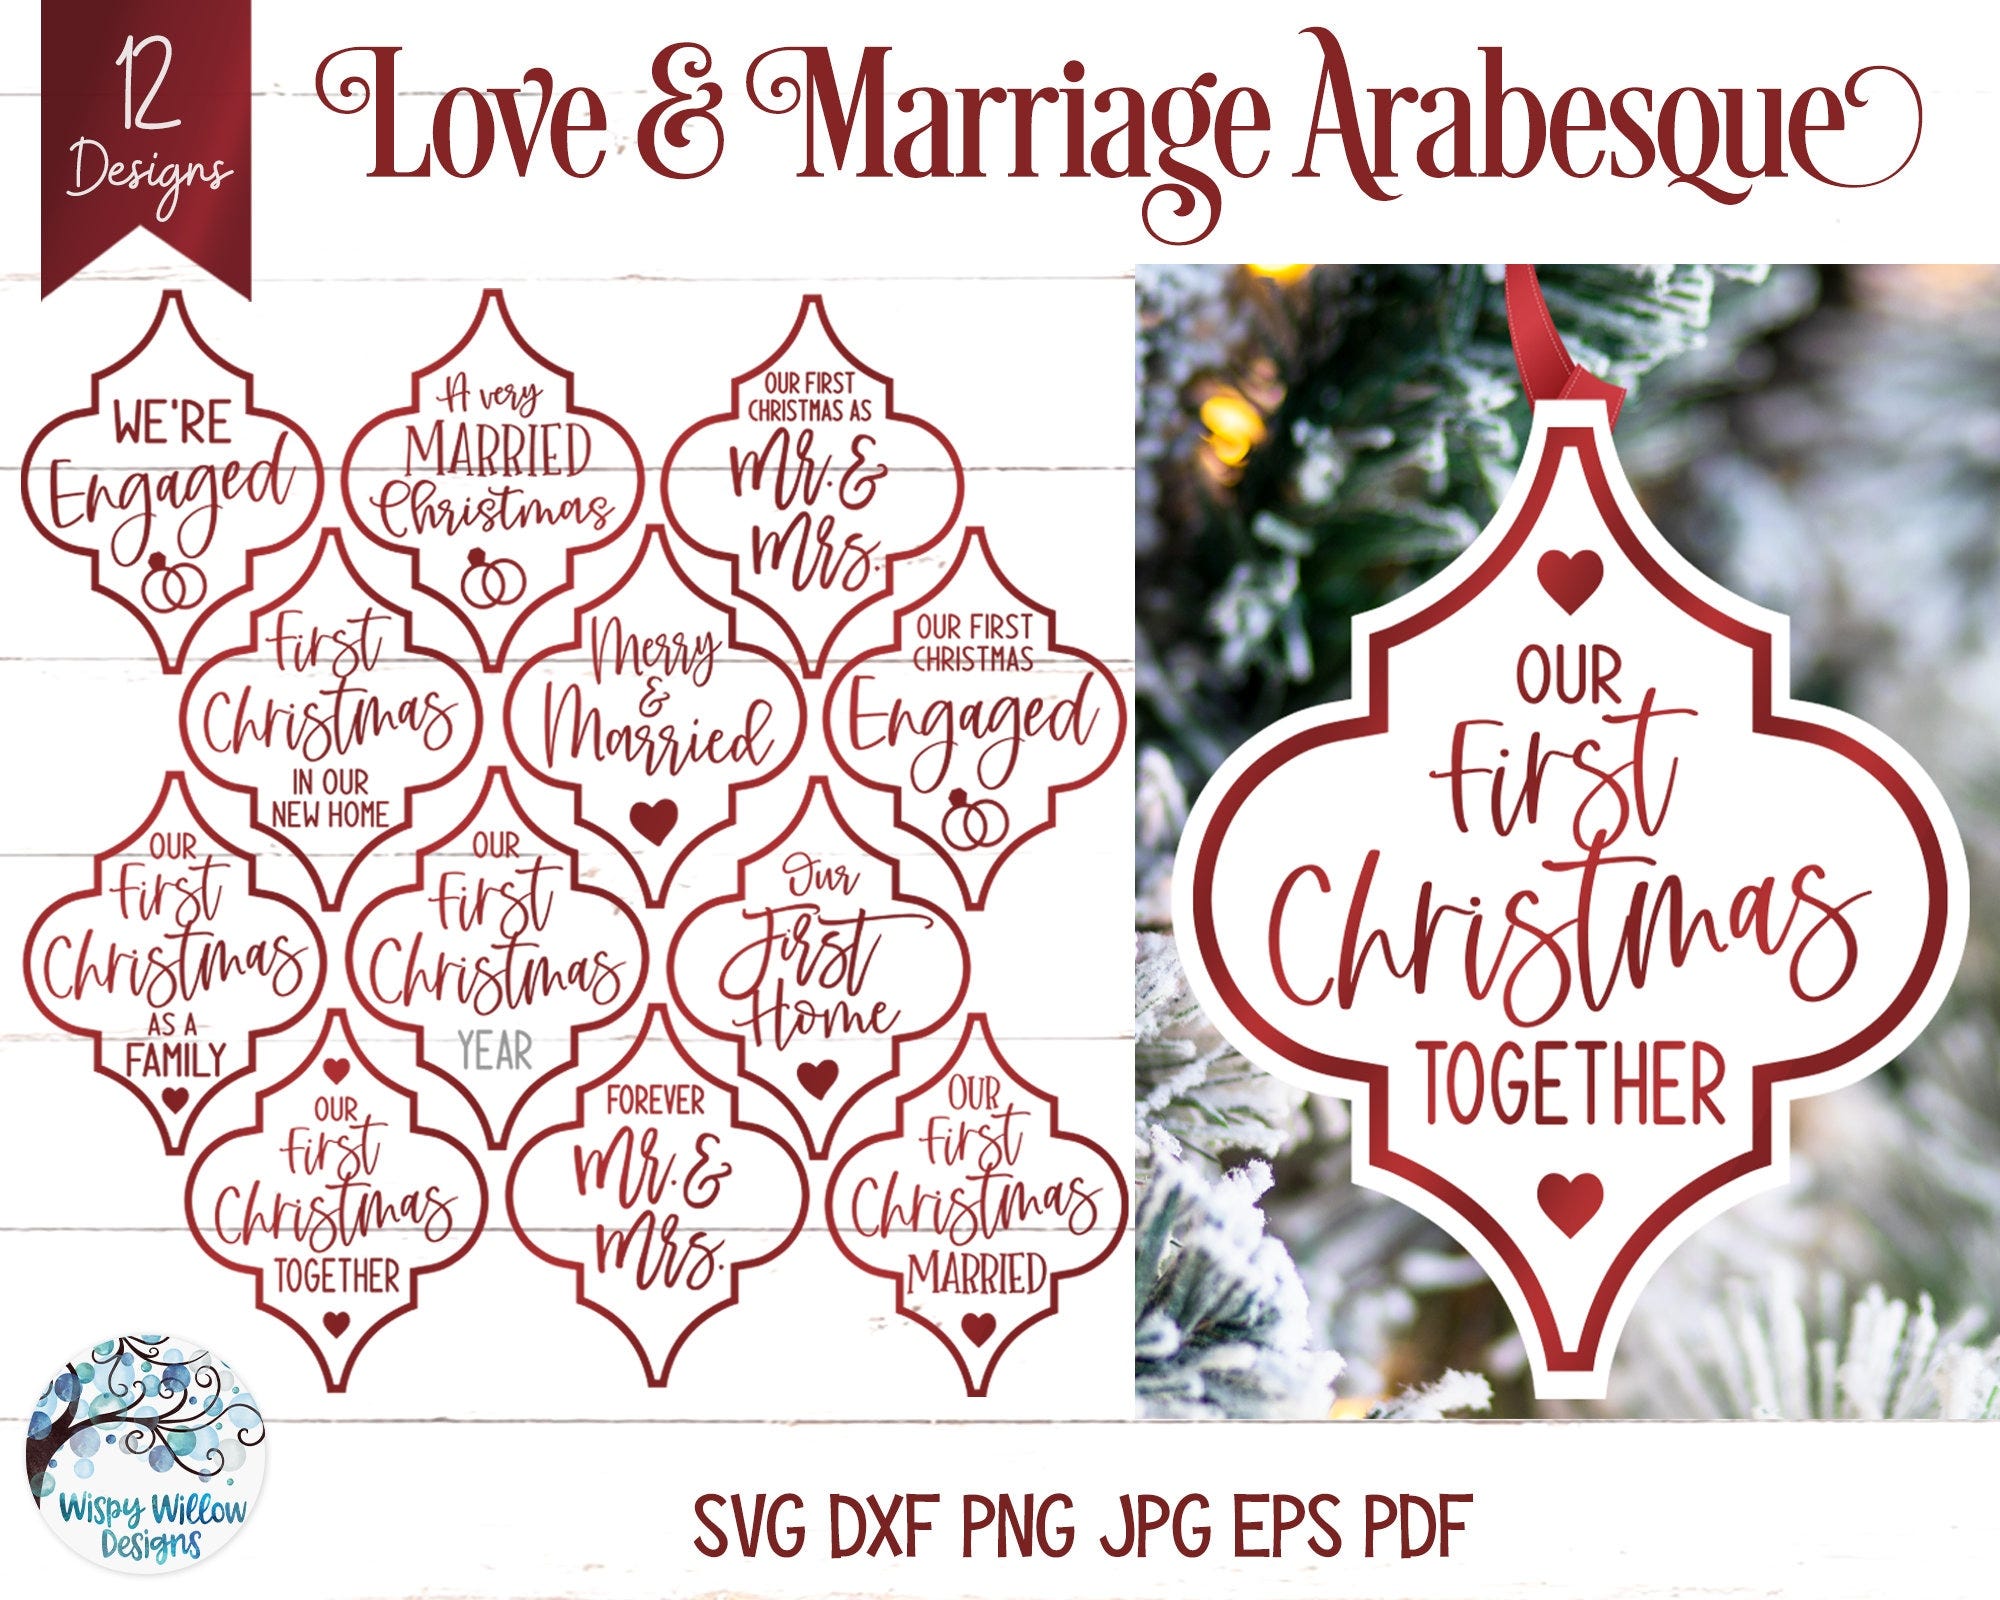 Love And Marriage Arabesque Christmas Ornament SVG Bundle, Married, Engaged, First Home, First Christmas Together, Vinyl Decal File, Cricut